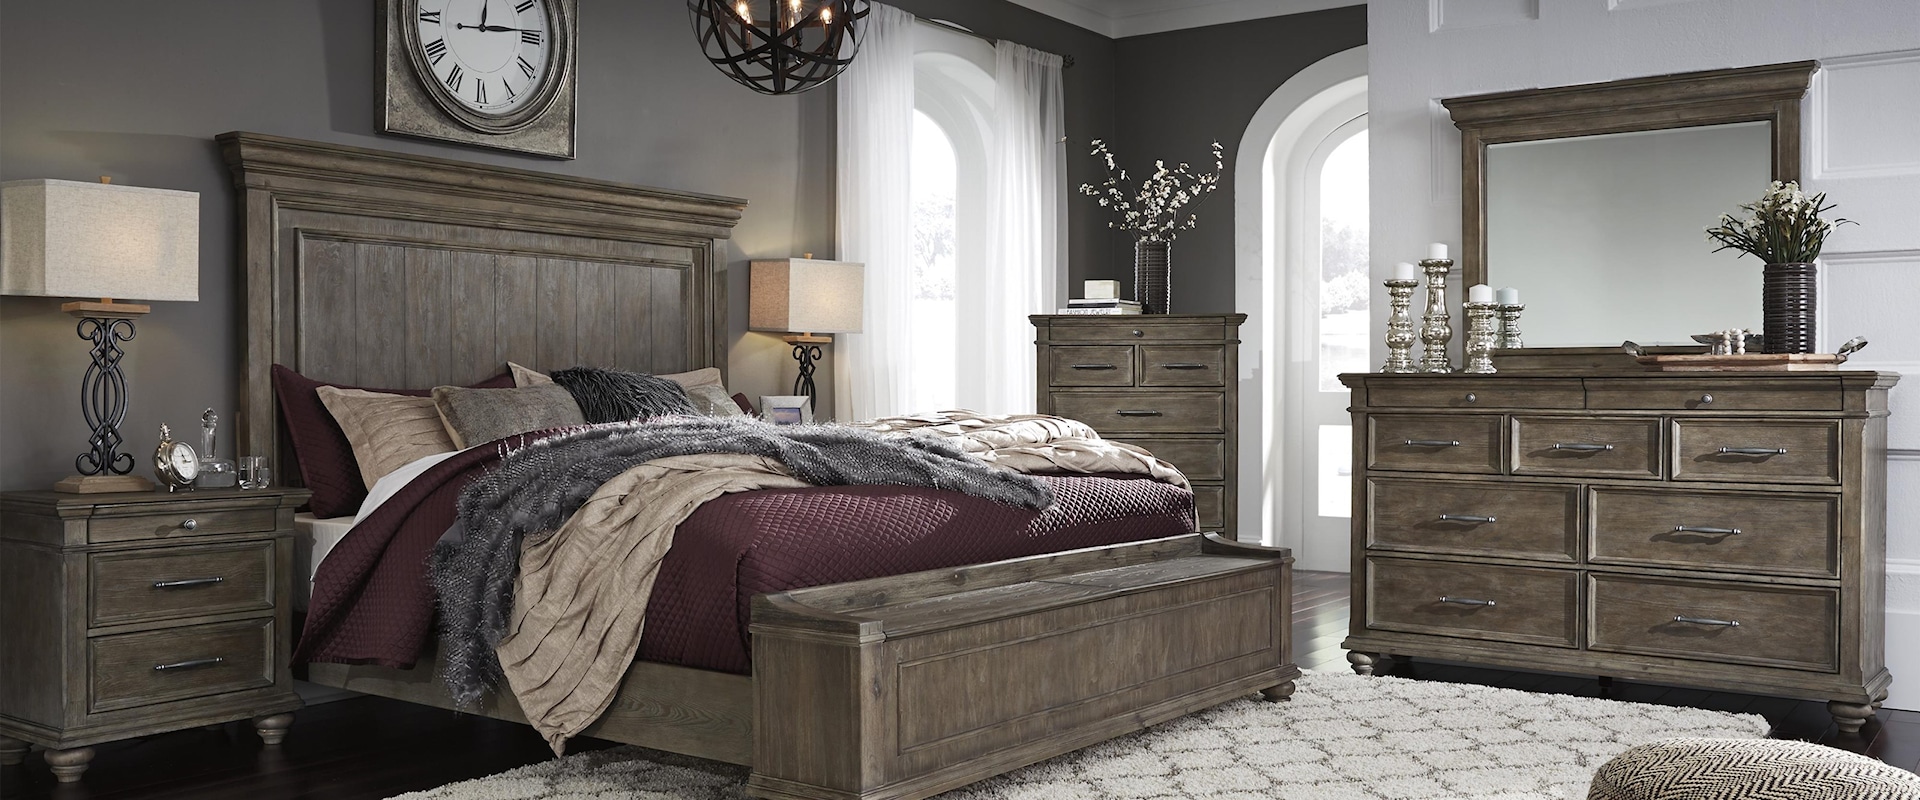 3 Piece King Panel Bedroom with Storage, 9 Drawer Dresser, Mirror, 3 Drawer Nightstand and 7 Drawer Chest Set